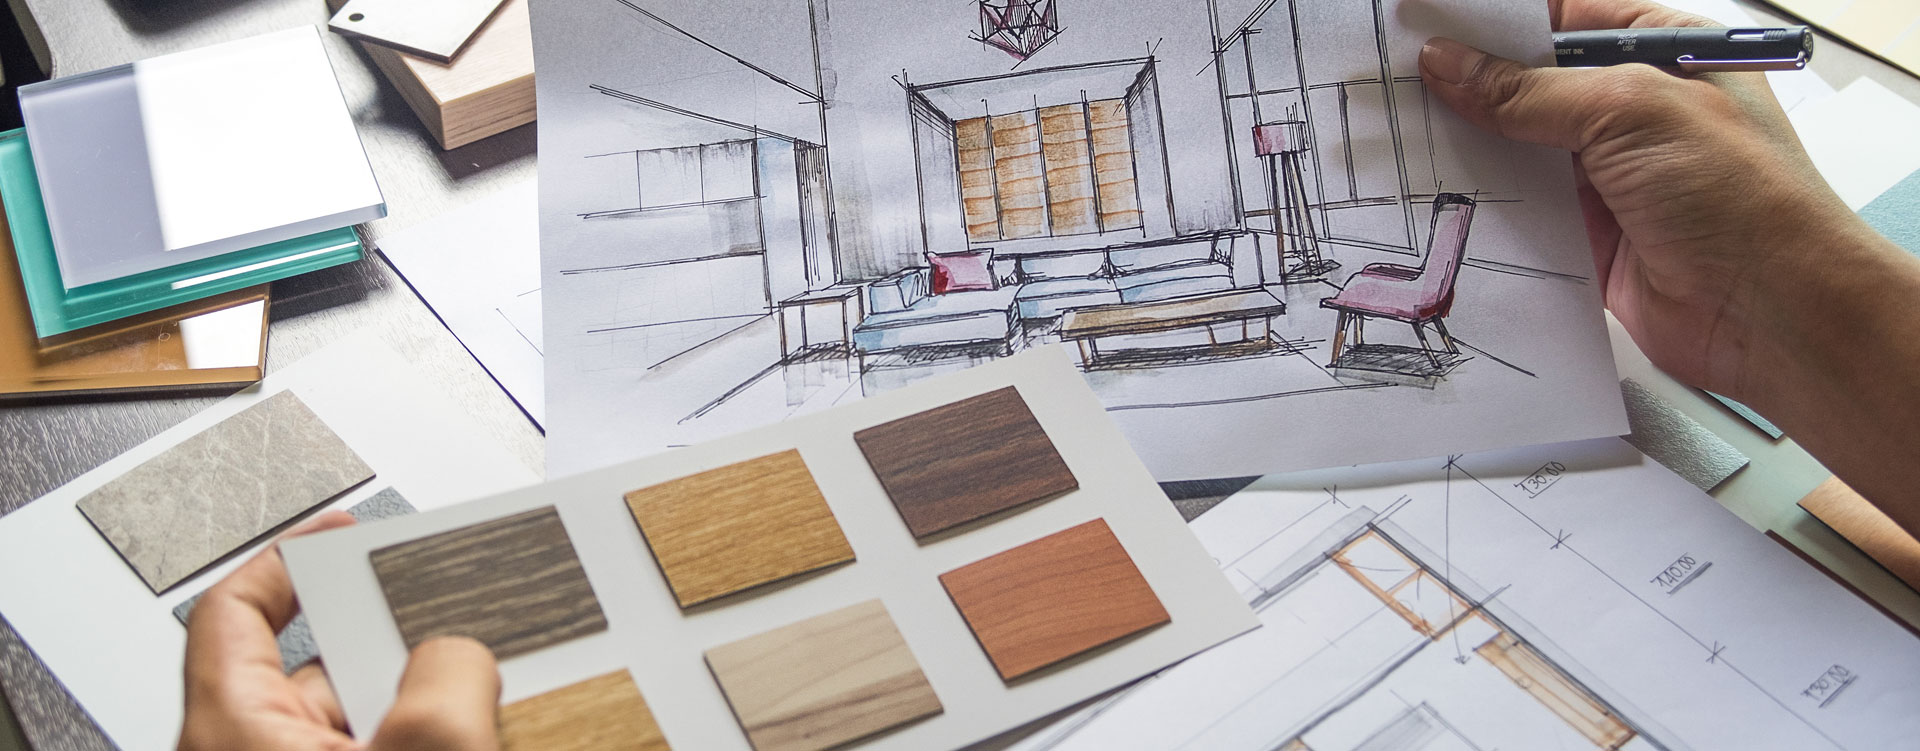 an image of a hand holding a sketch of a room in one hand and some material samples in the other